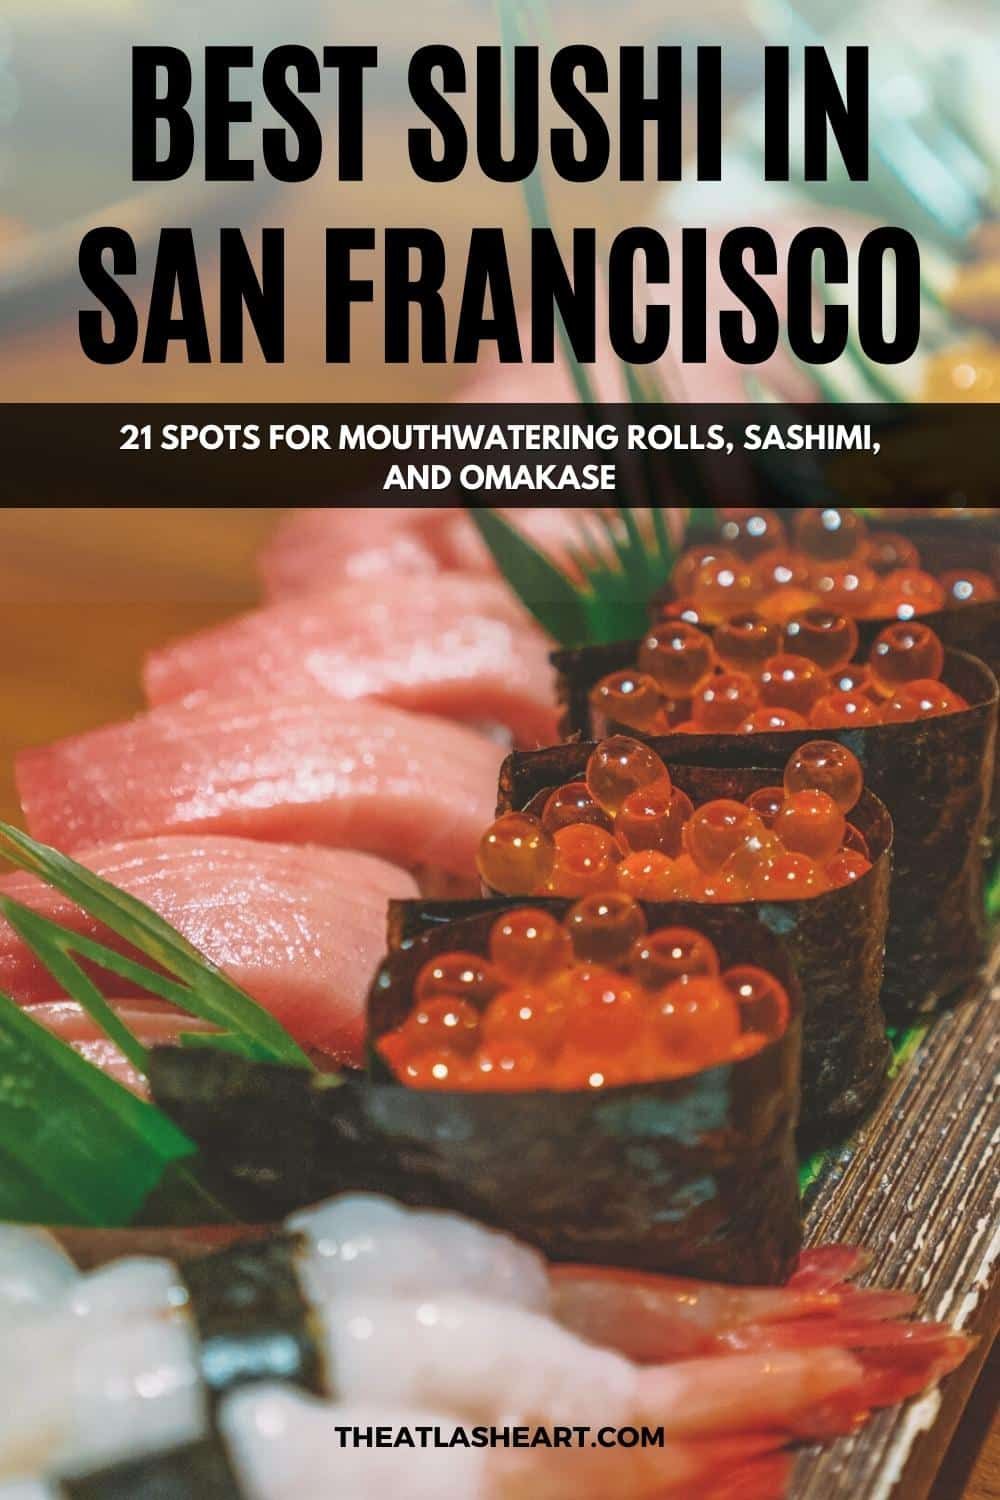 Best Sushi in San Francisco: 21 Spots for Mouthwatering Rolls, Sashimi, and Omakase